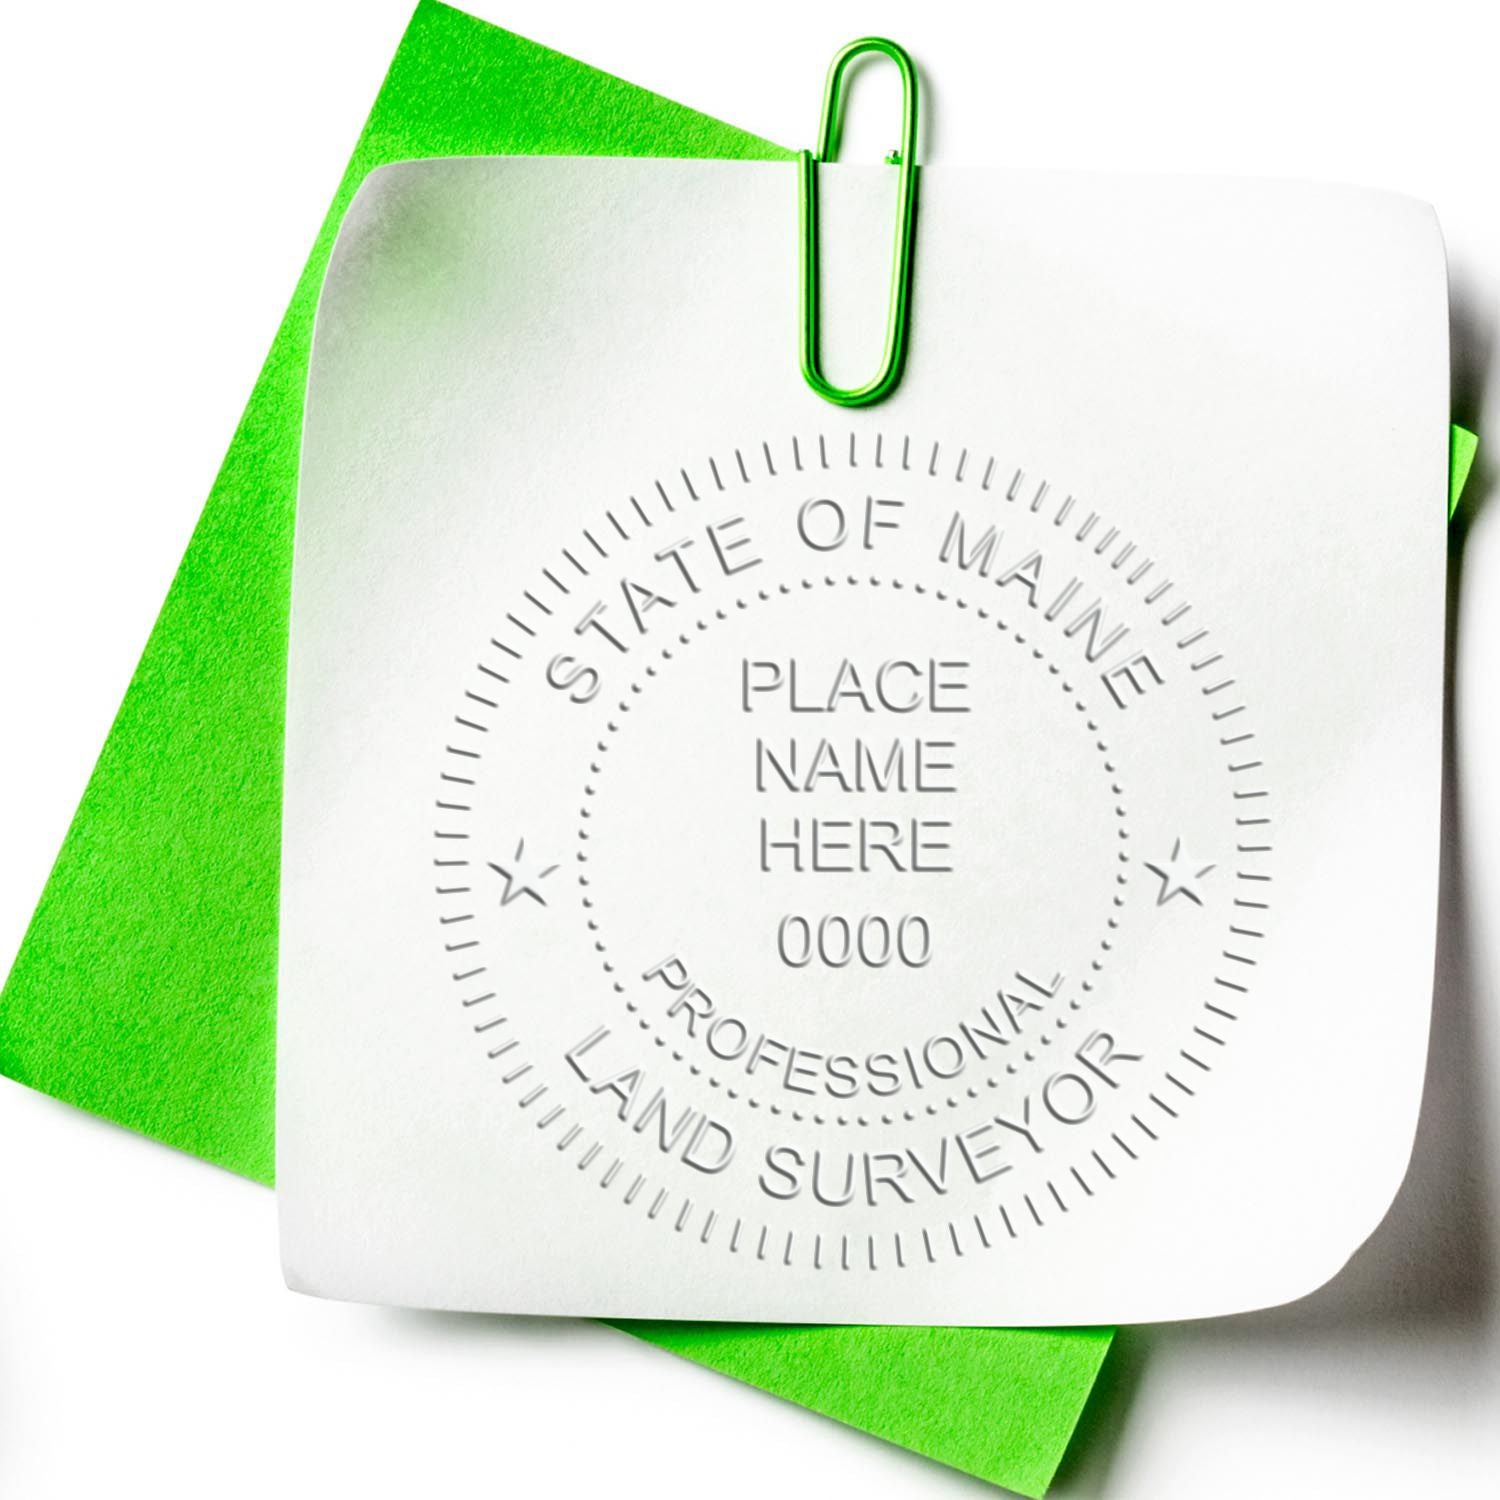 The main image for the Handheld Maine Land Surveyor Seal depicting a sample of the imprint and electronic files